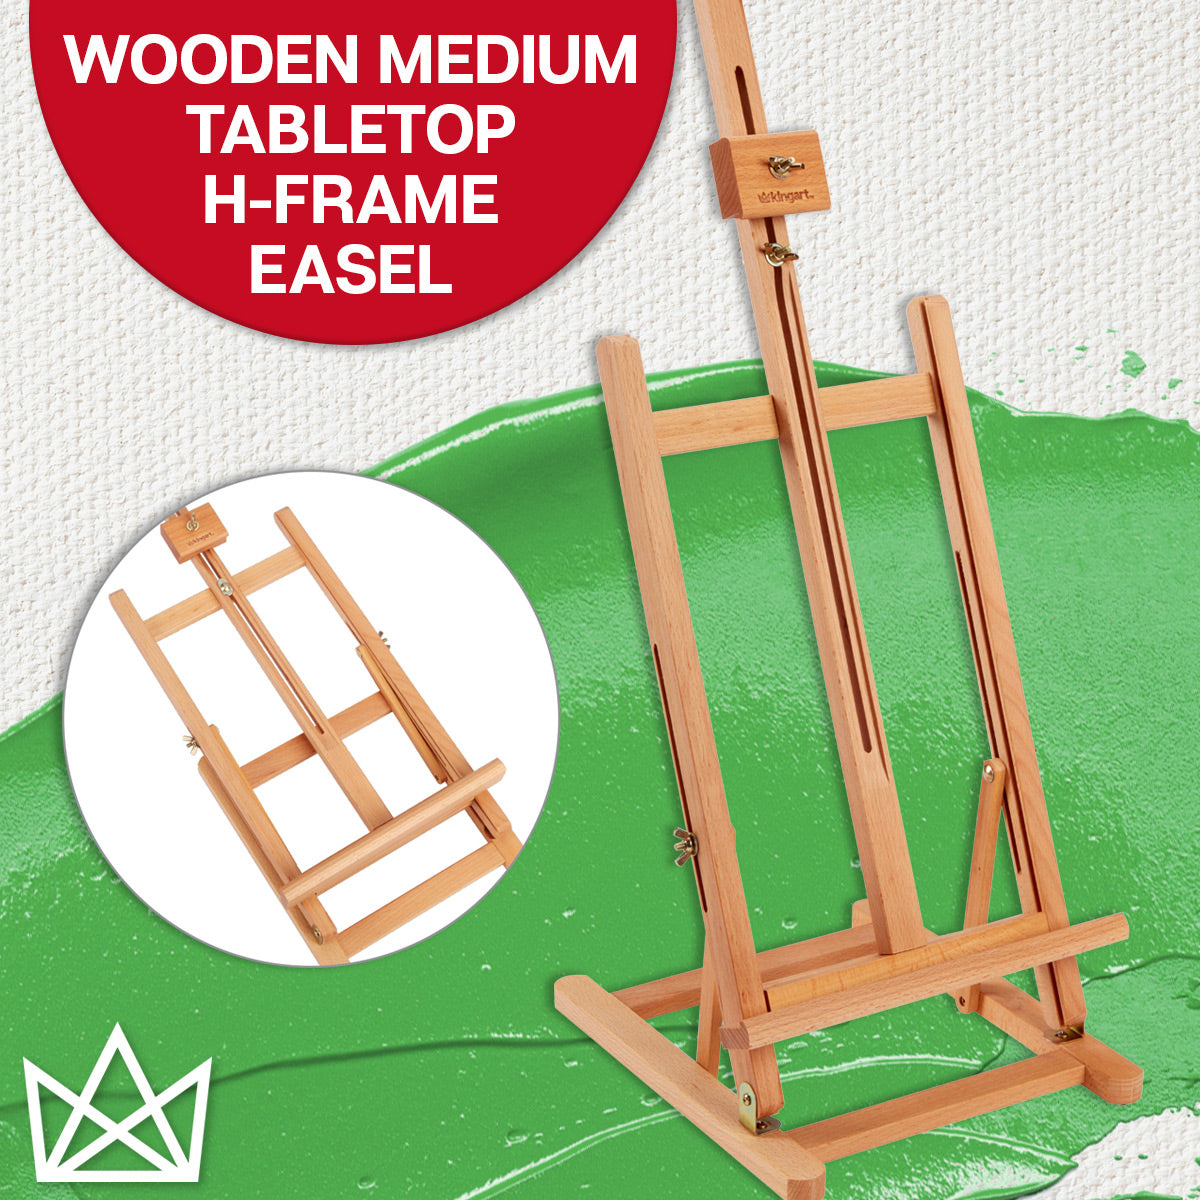 ATWORTH American Oak Medium H-Frame Artist Easel, Hold Canvas up to 48”,  Deluxe Wooden Adjustable Tilting Floor Painting Easel Stand with Storage